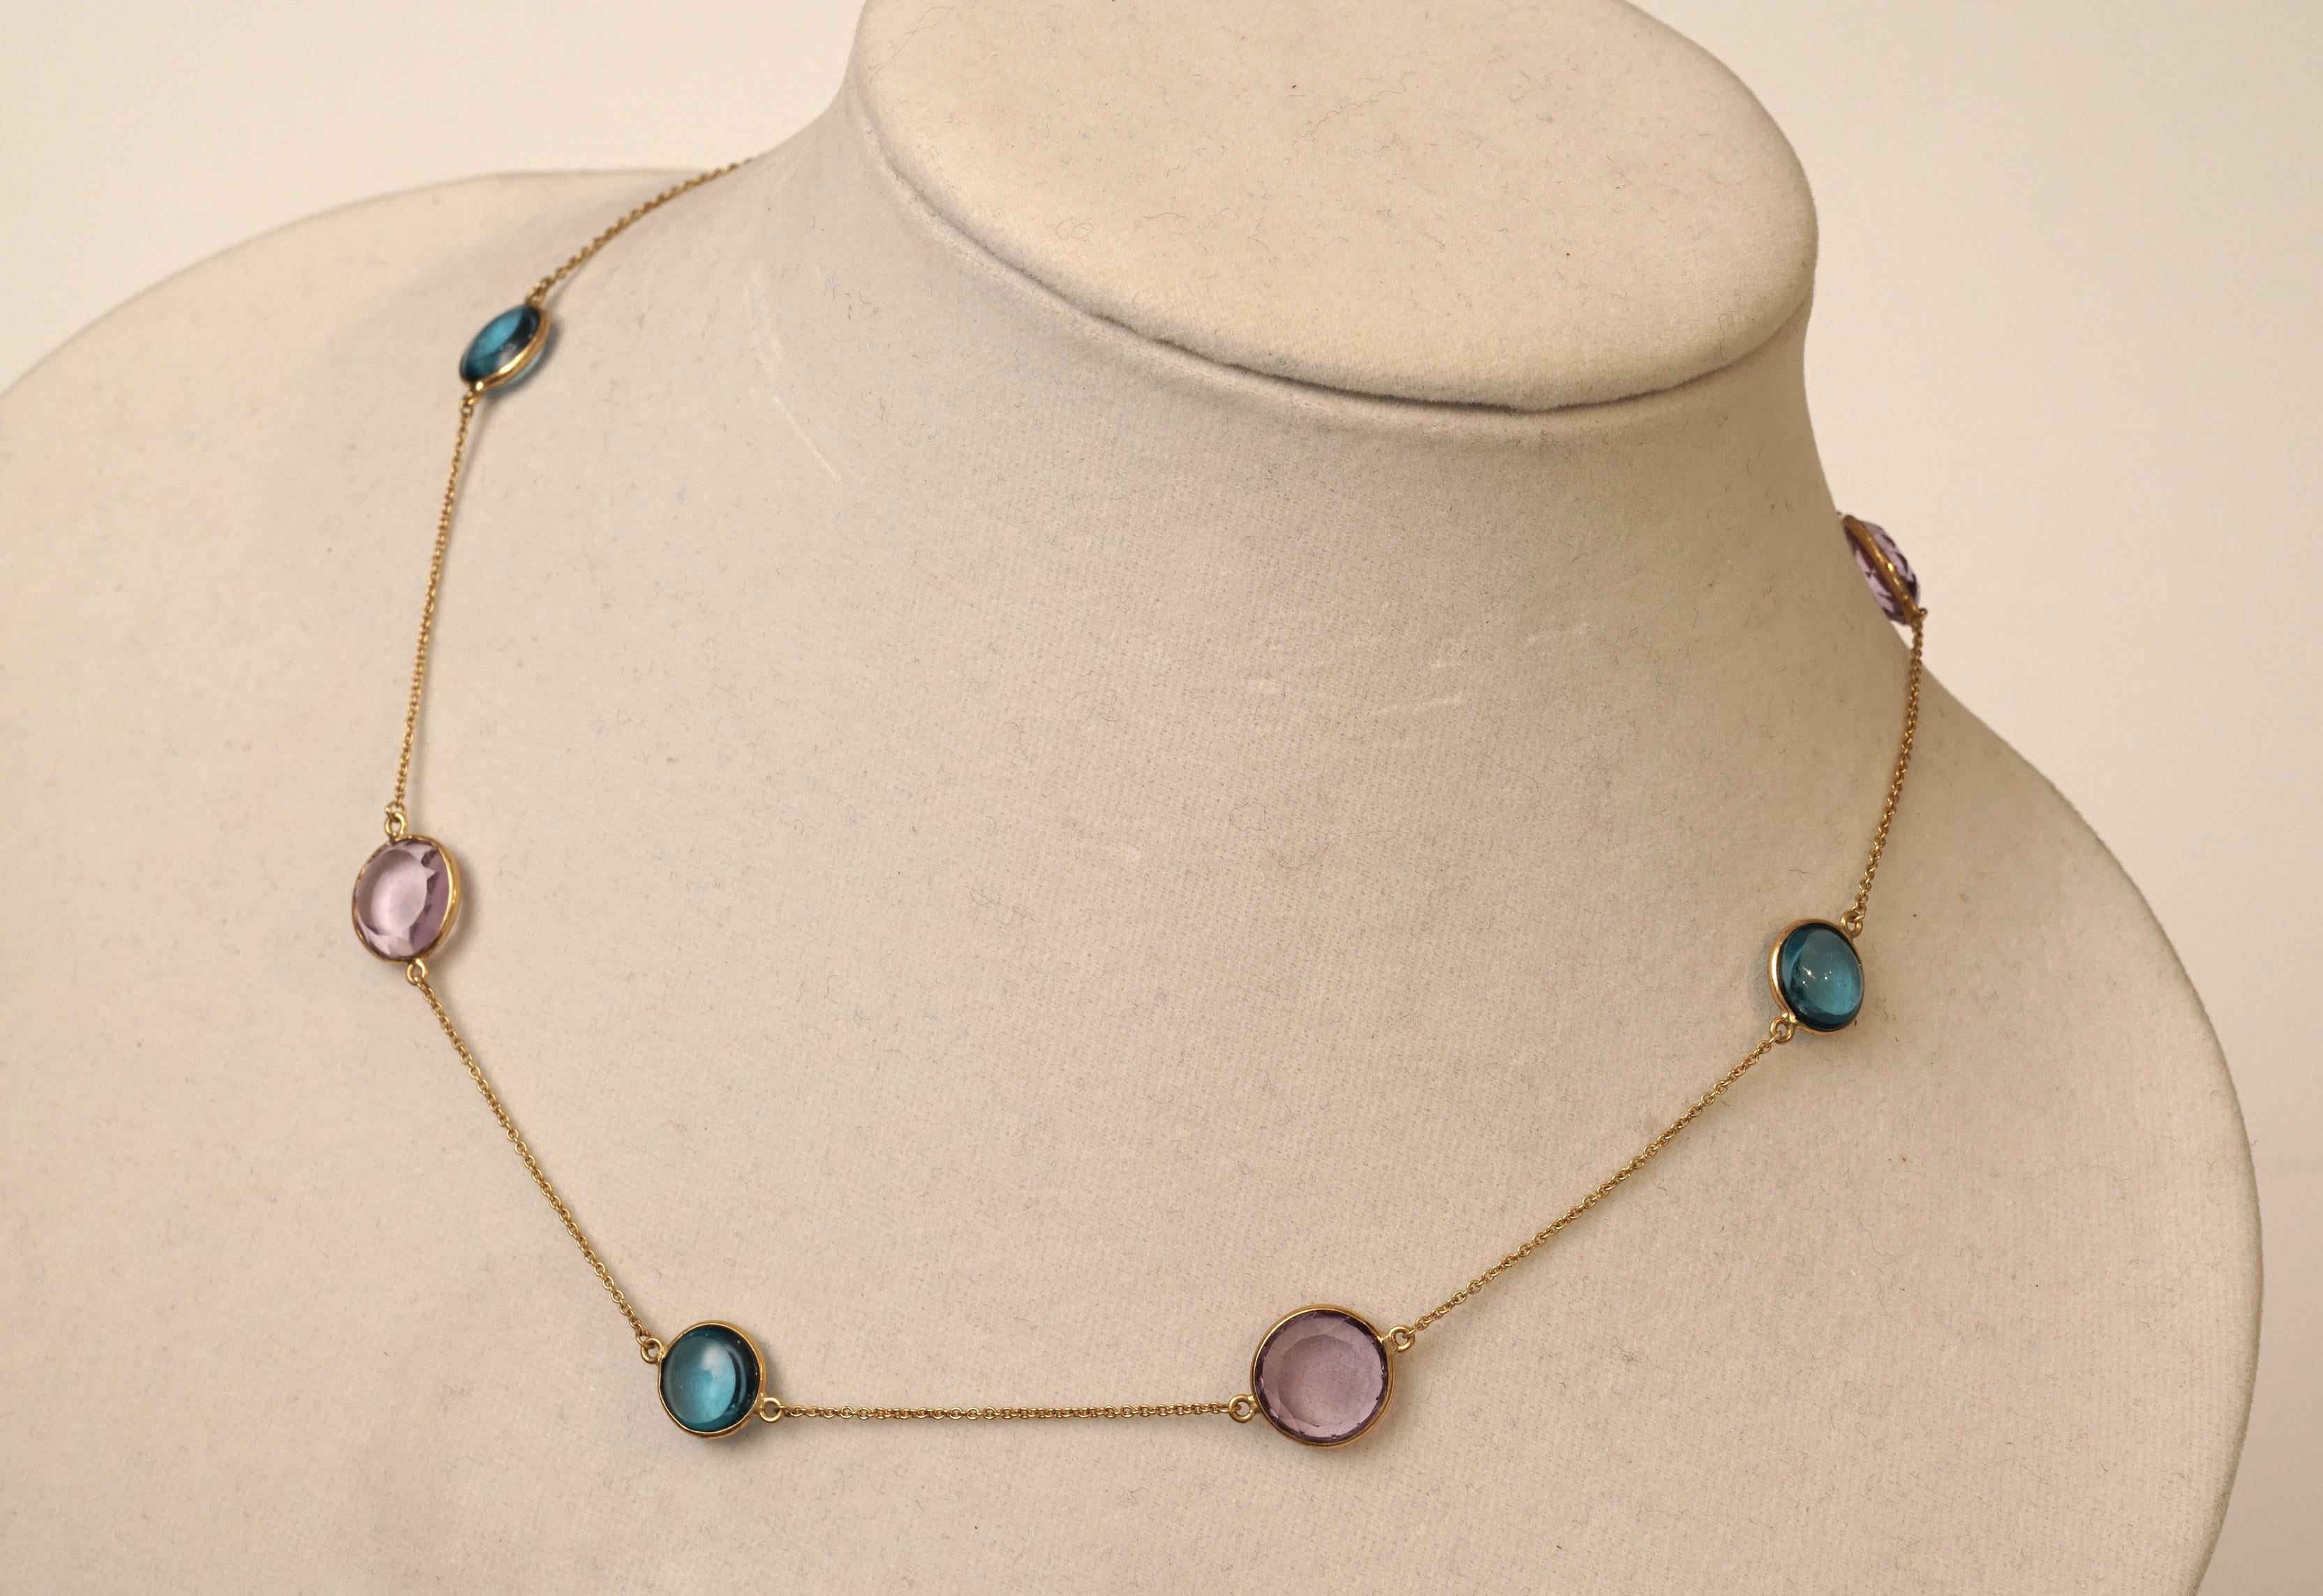 Alternating blue topaz and amethyst stones bordered in 18K gold on a delicate 18K gold chain.  The blue topaz are cabochons and the amethyst are faceted, and stones are open on both sides.  The diameter of the amethyst are 1/2 inch and the blue